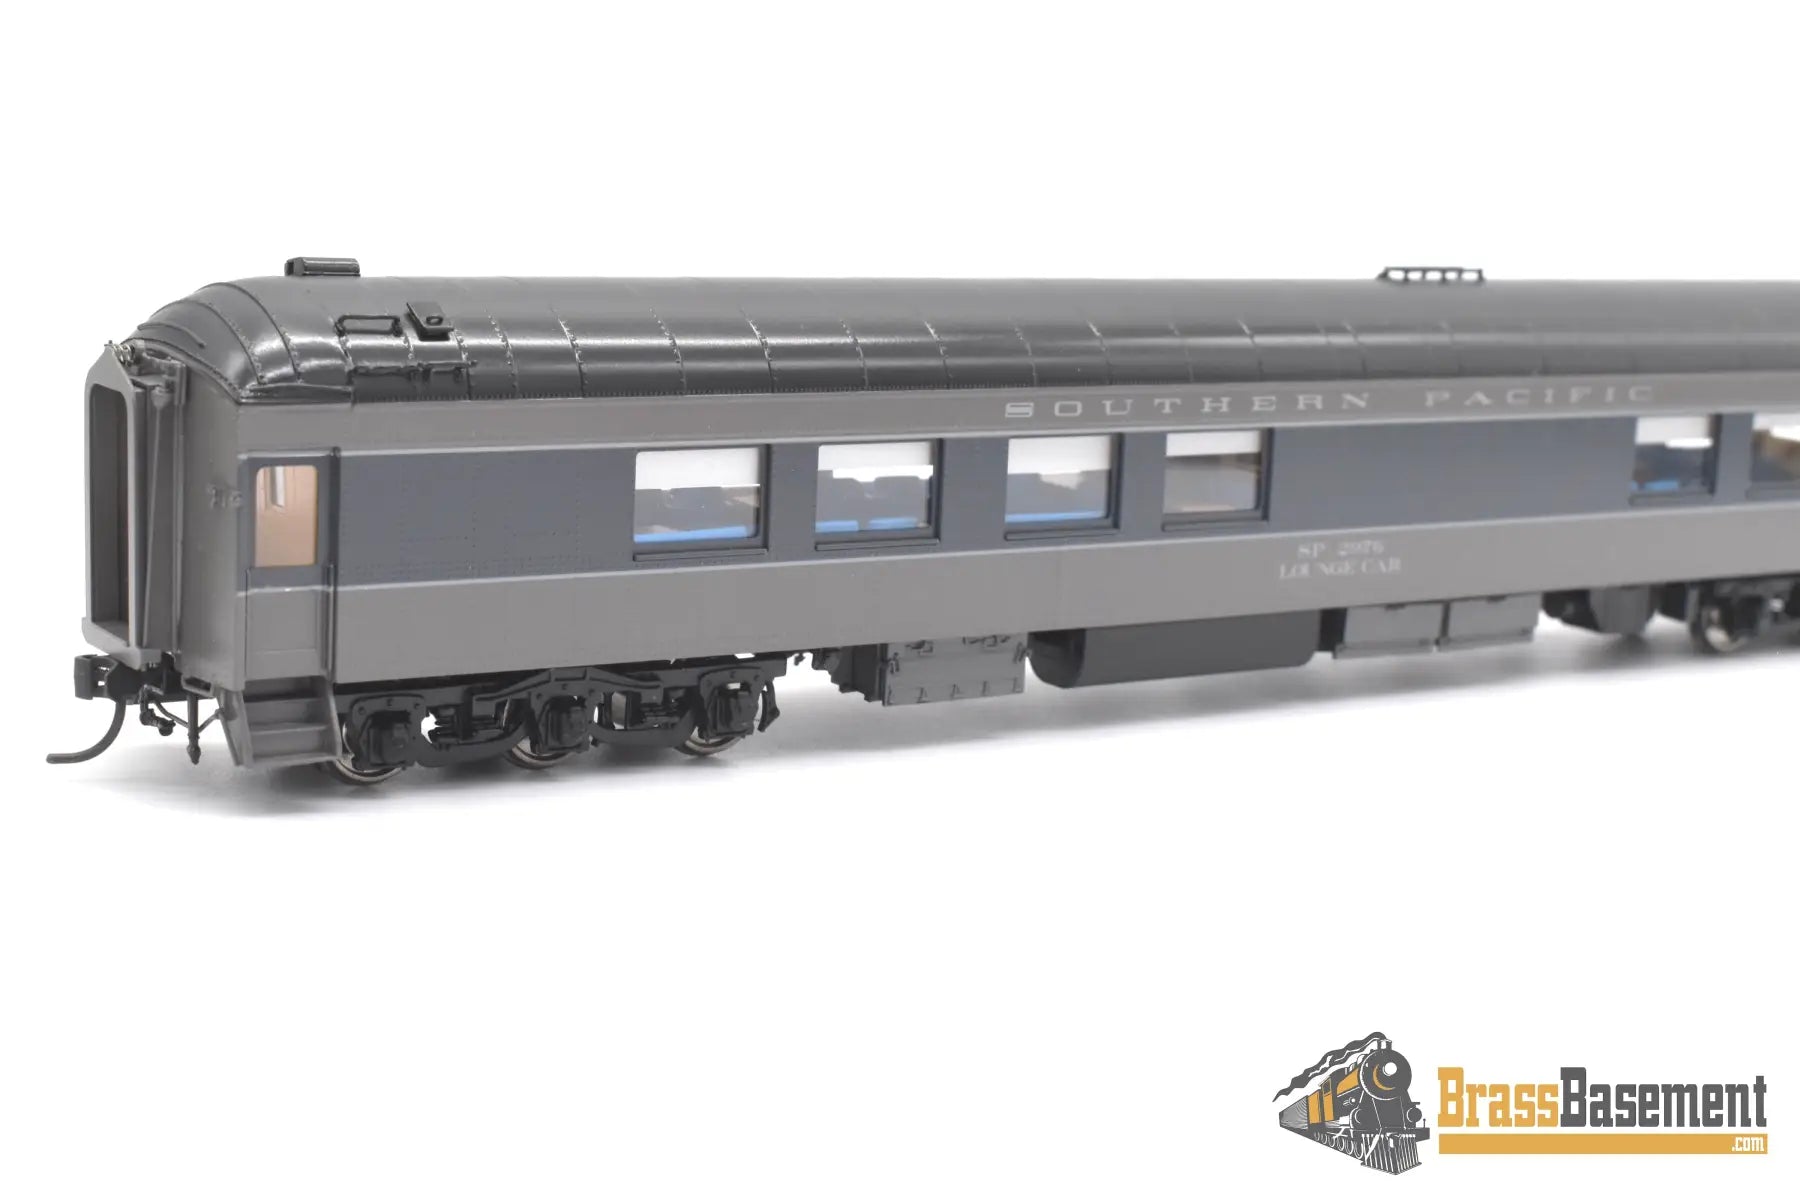 Ho Brass - Tcy 0915 Southern Pacific #2976 Harriman Lounge 77 - L Two Tone Gray Passenger